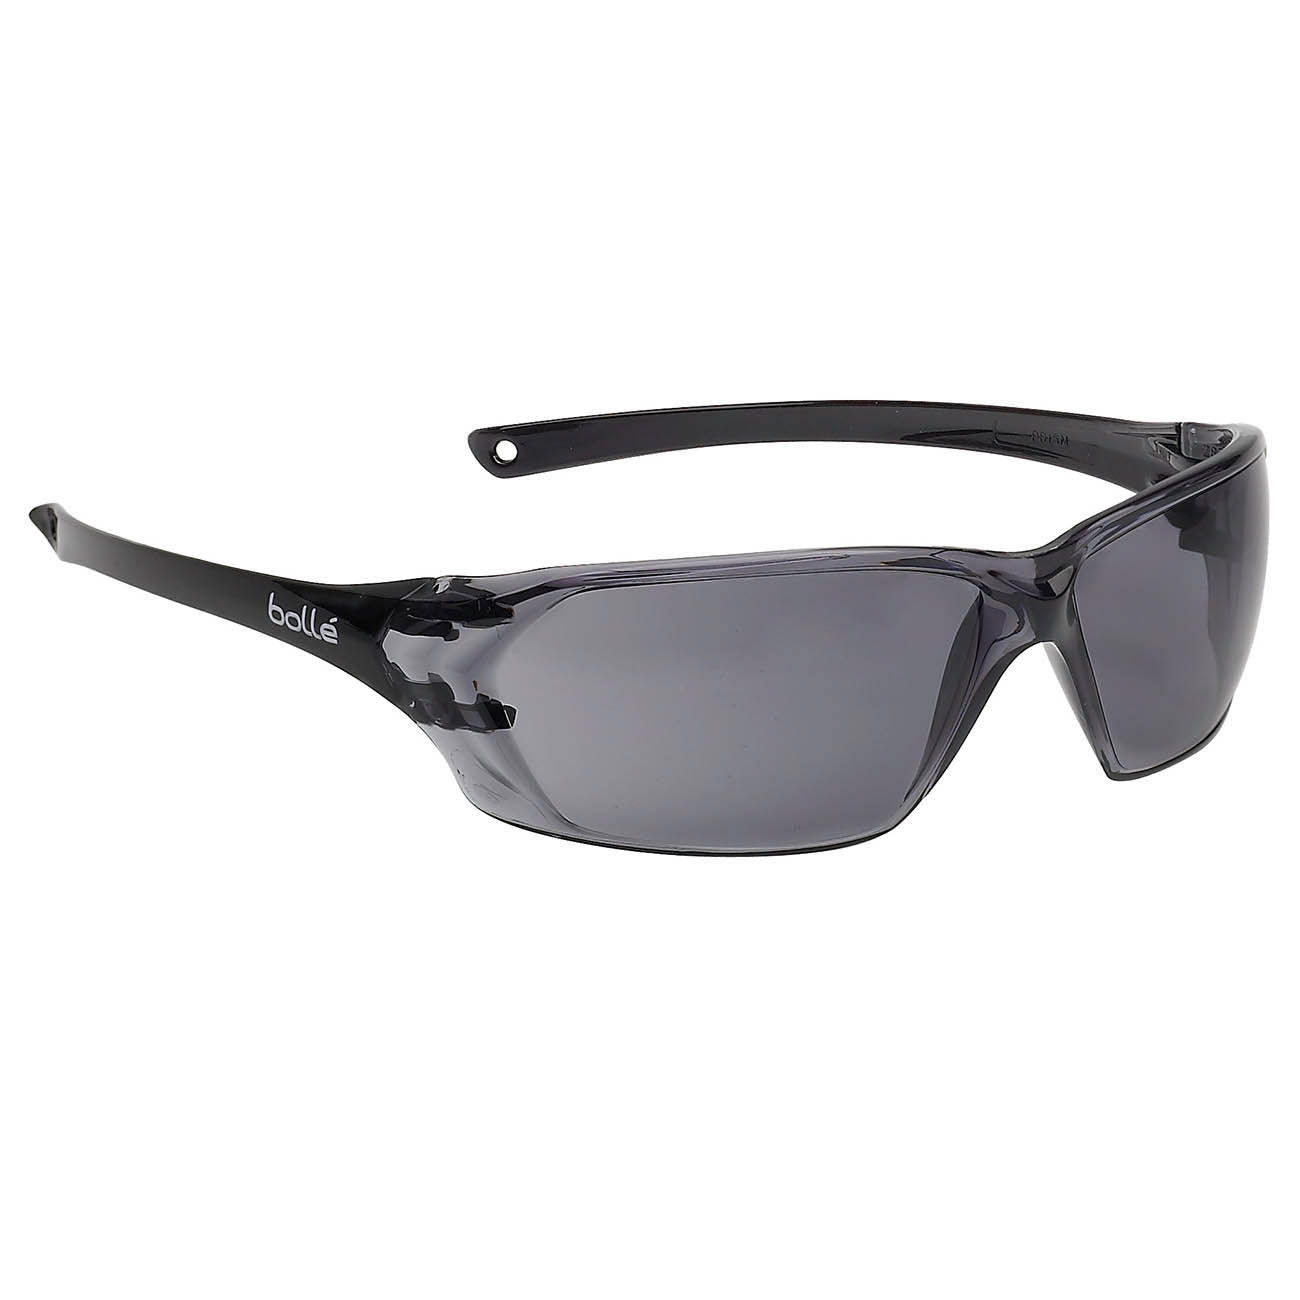 Bolle PRISM PRIPSF Safety Glasses Smoke Lens